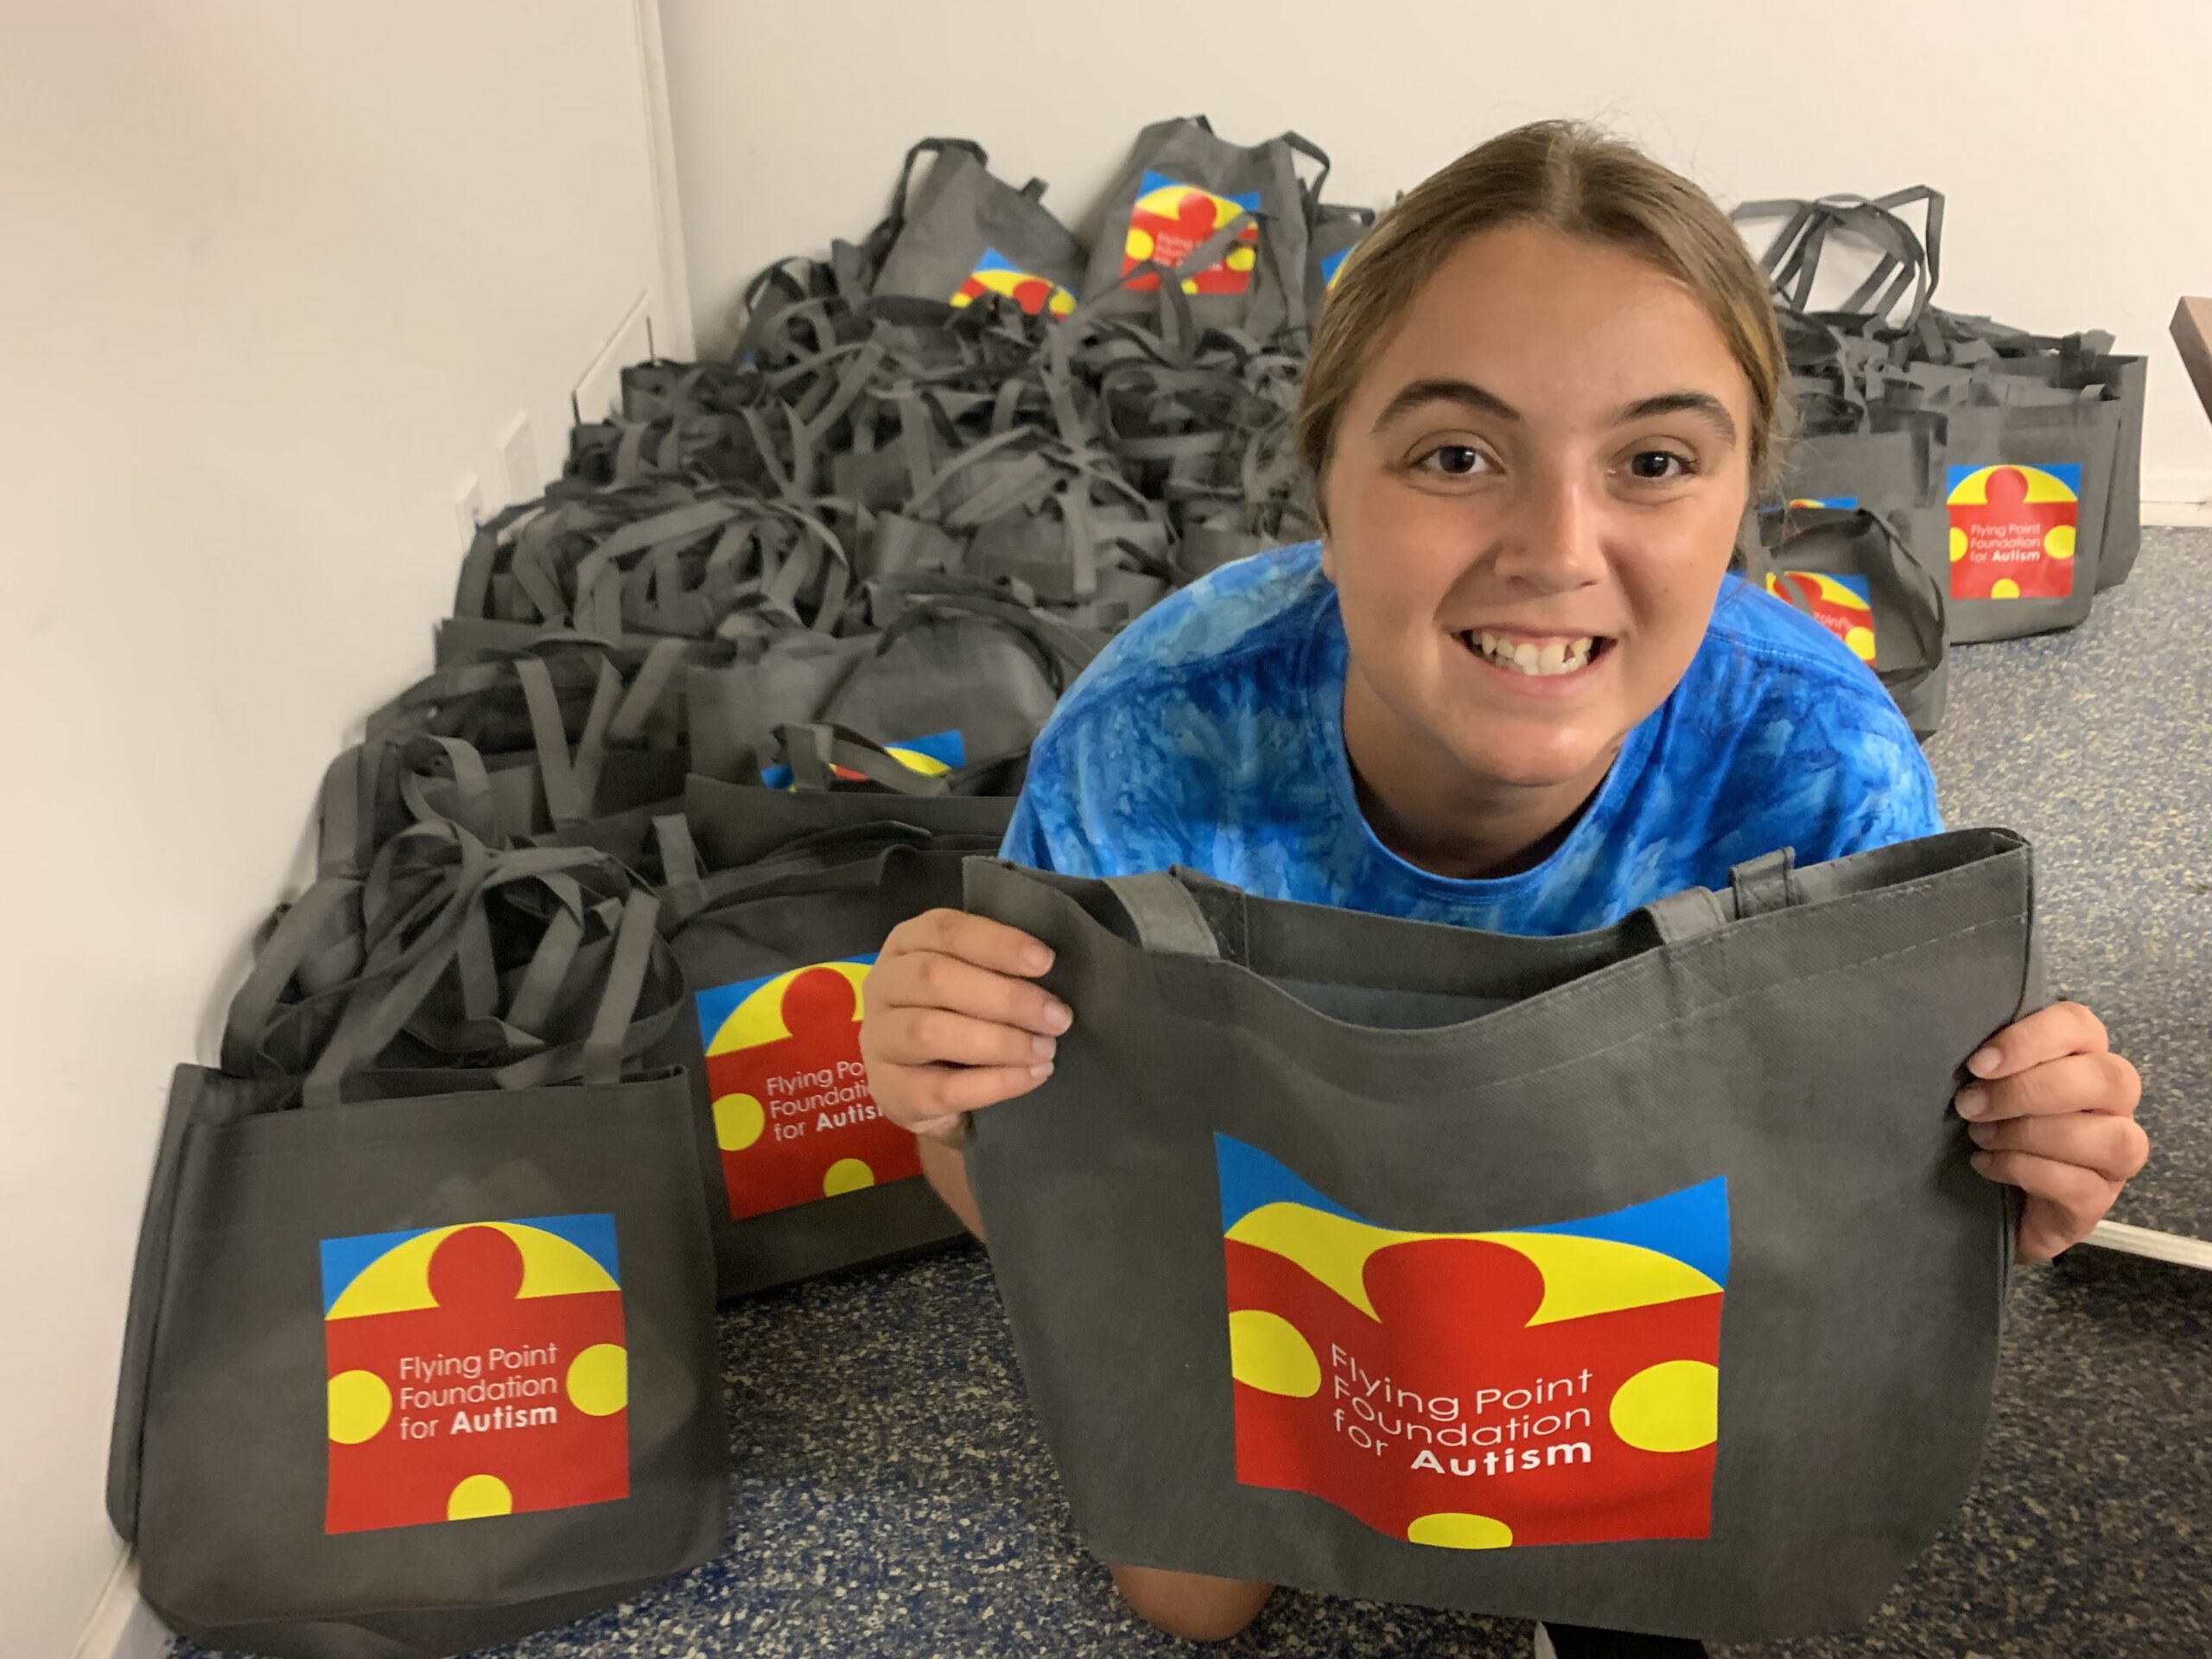 Anna Tuzzolo with the Flying Point Foundation for Autism GoBags she packed for emergency responders. COURTESY FPF.